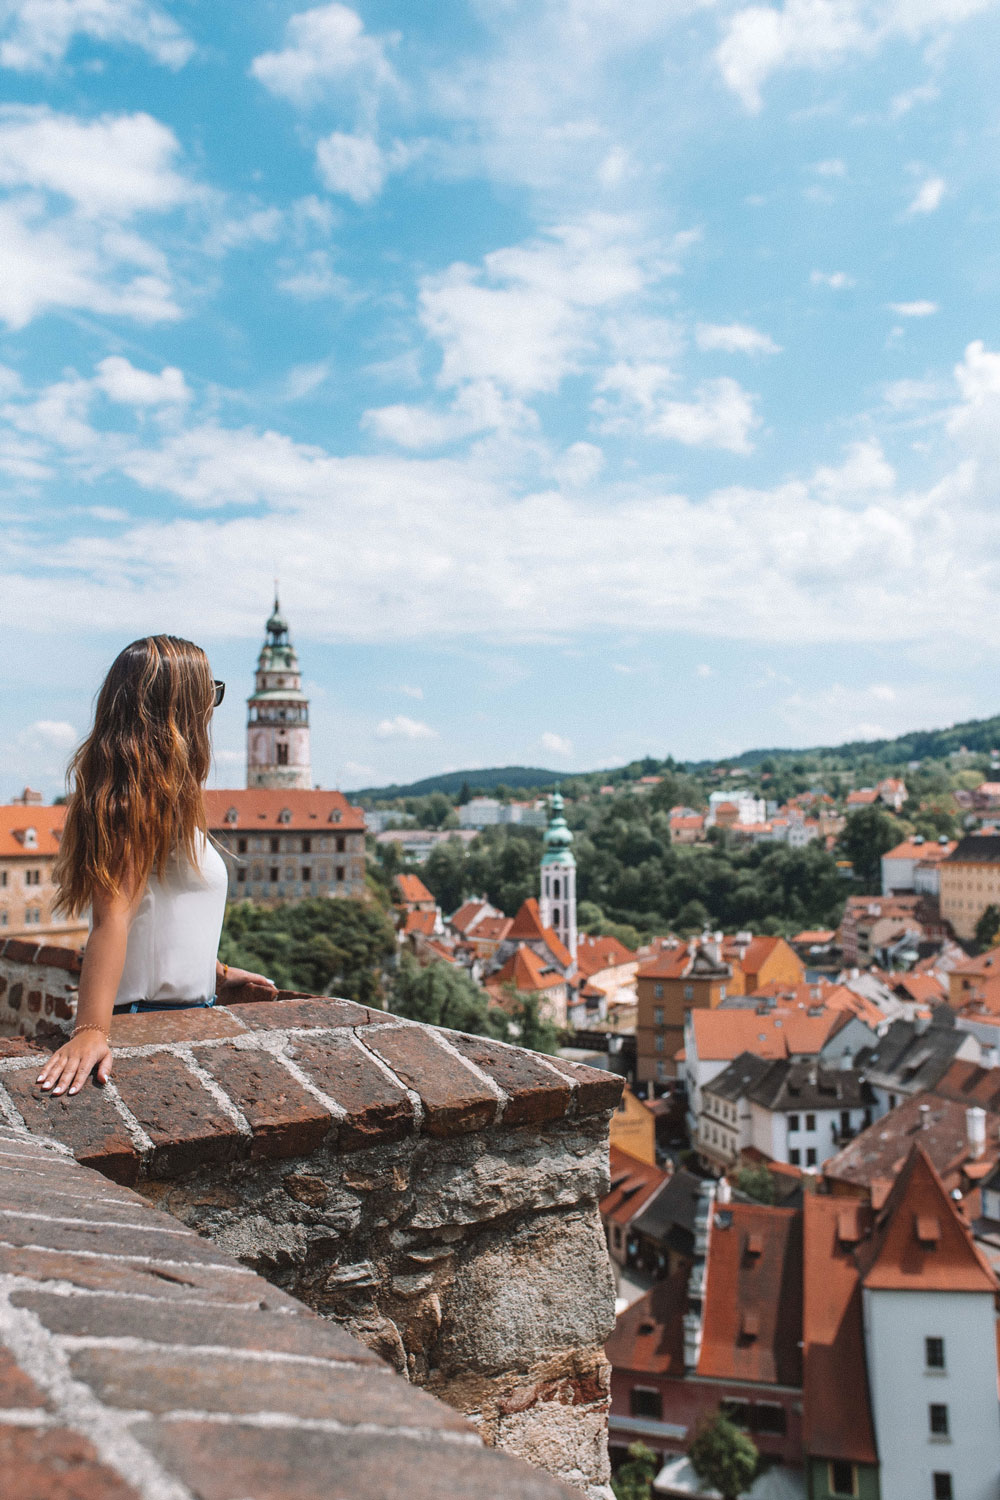 What to see in the Czech Republic